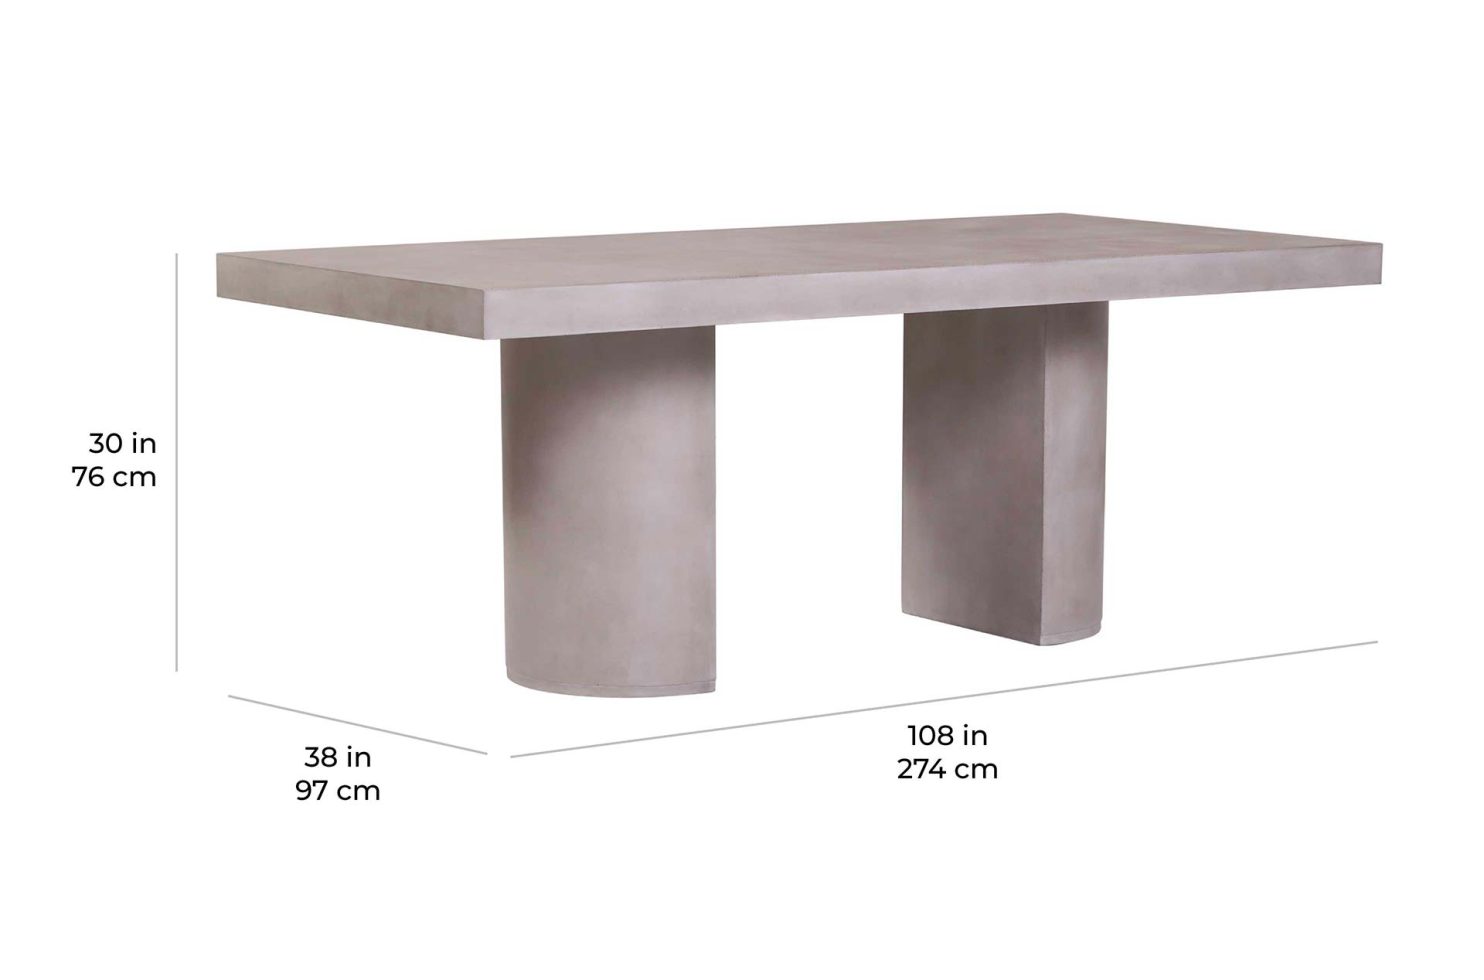 perp andoo rectangle dining table half moon pedestals scale dims